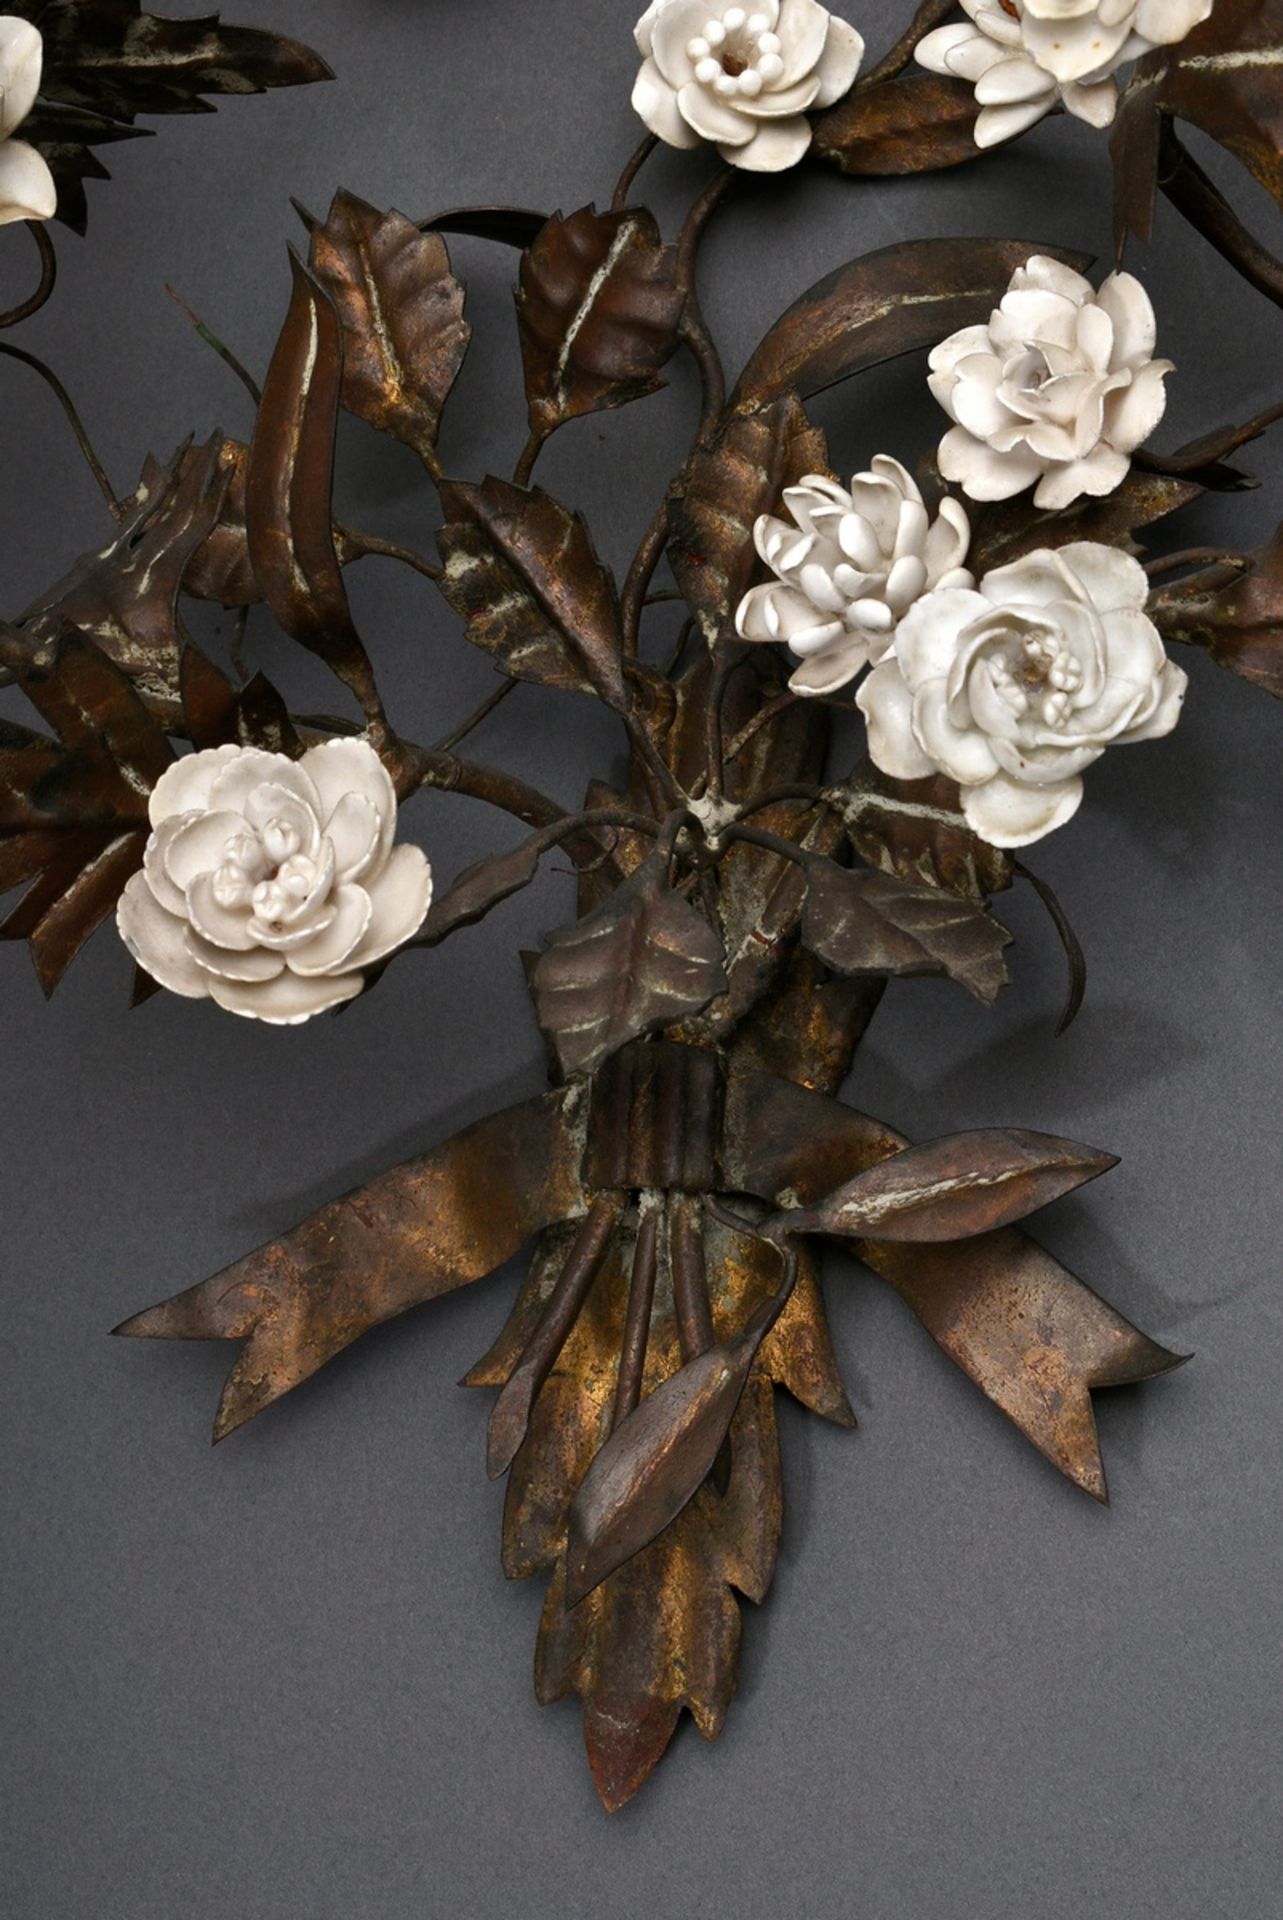 Pair of Italian wall arms in floral façon with porcelain blossoms, sheet brass with remnants of gil - Image 4 of 6